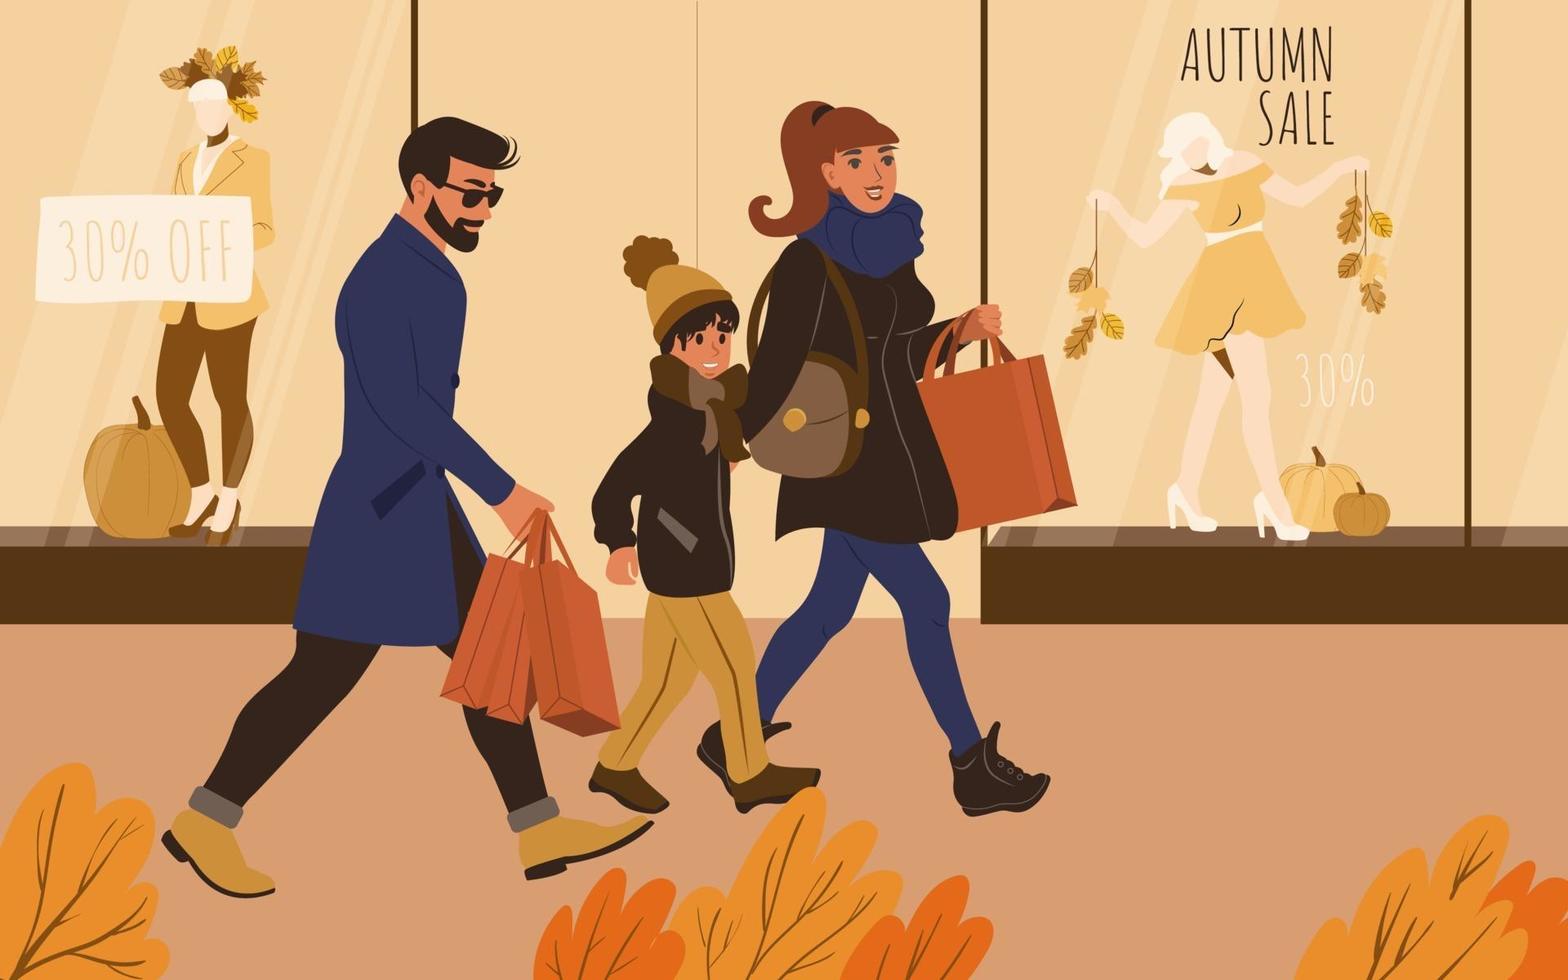 The family is shopping at the autumn sales vector